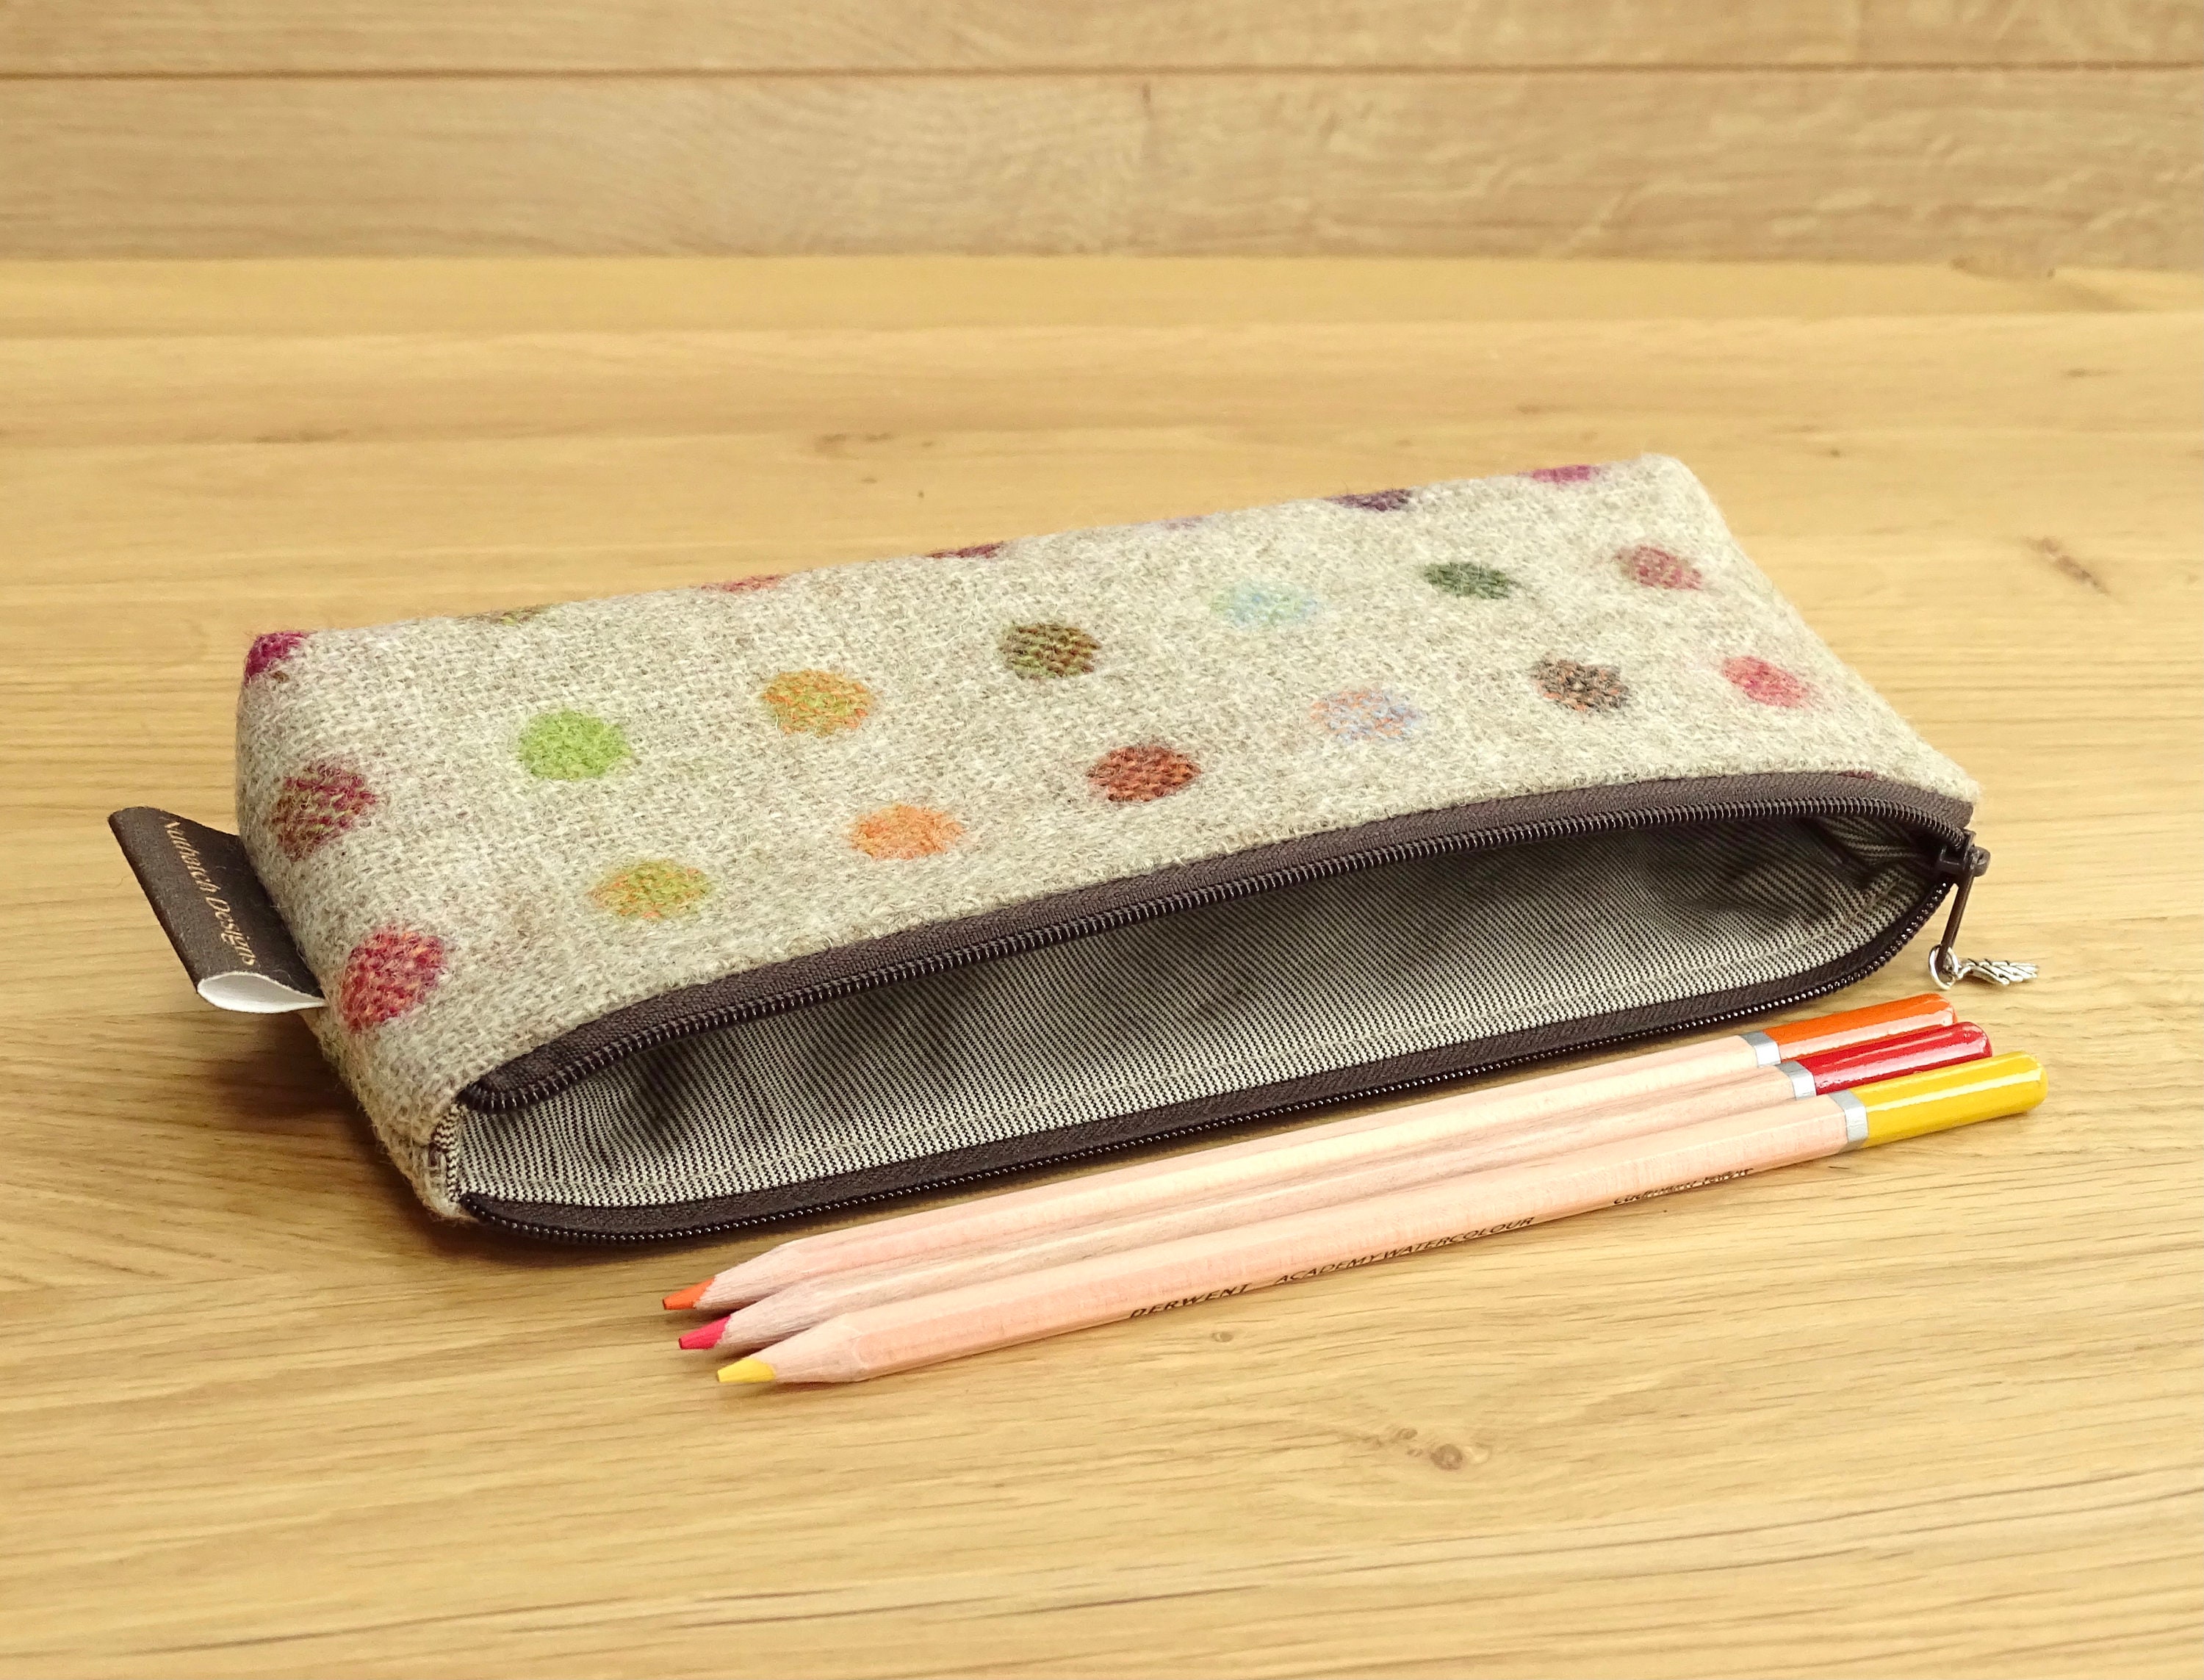 Black and White Pencil Case, Pencil Pouch, Pencil Bag, Pen Case, Pencil  Cases, Artist Pencil Case, Kids Pencil Case, Knitting Needle Storage 